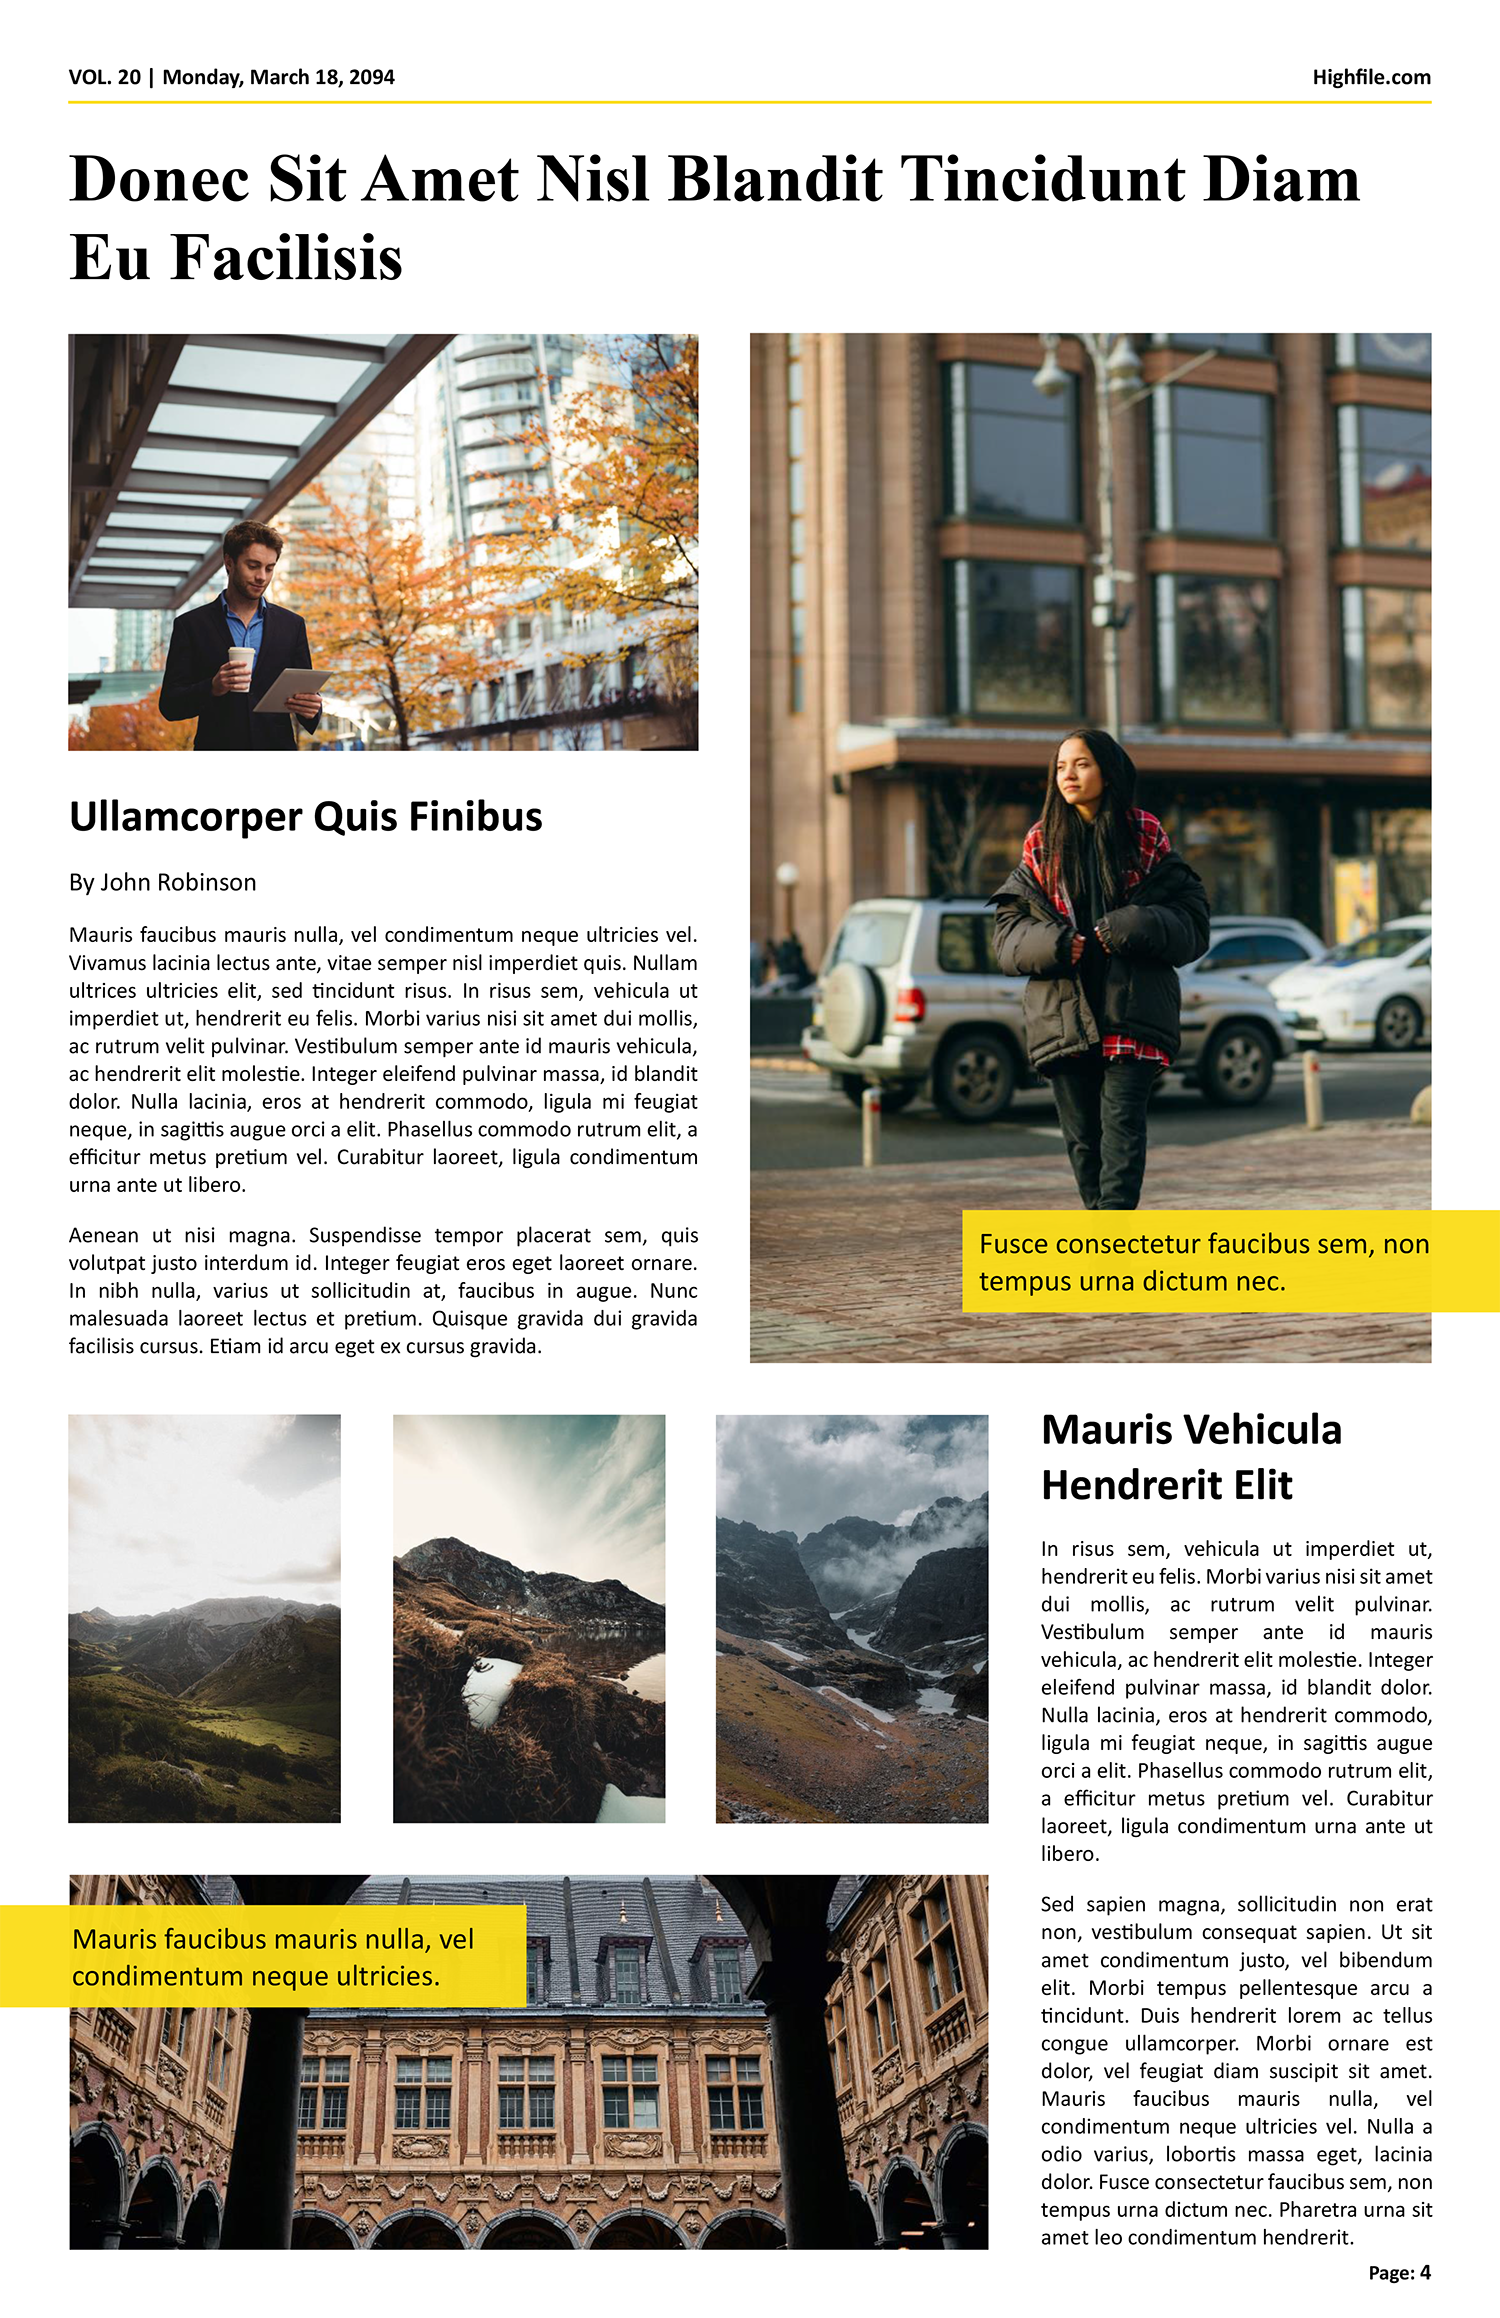 Modern Clean Newspaper Article Page Template - Page 04